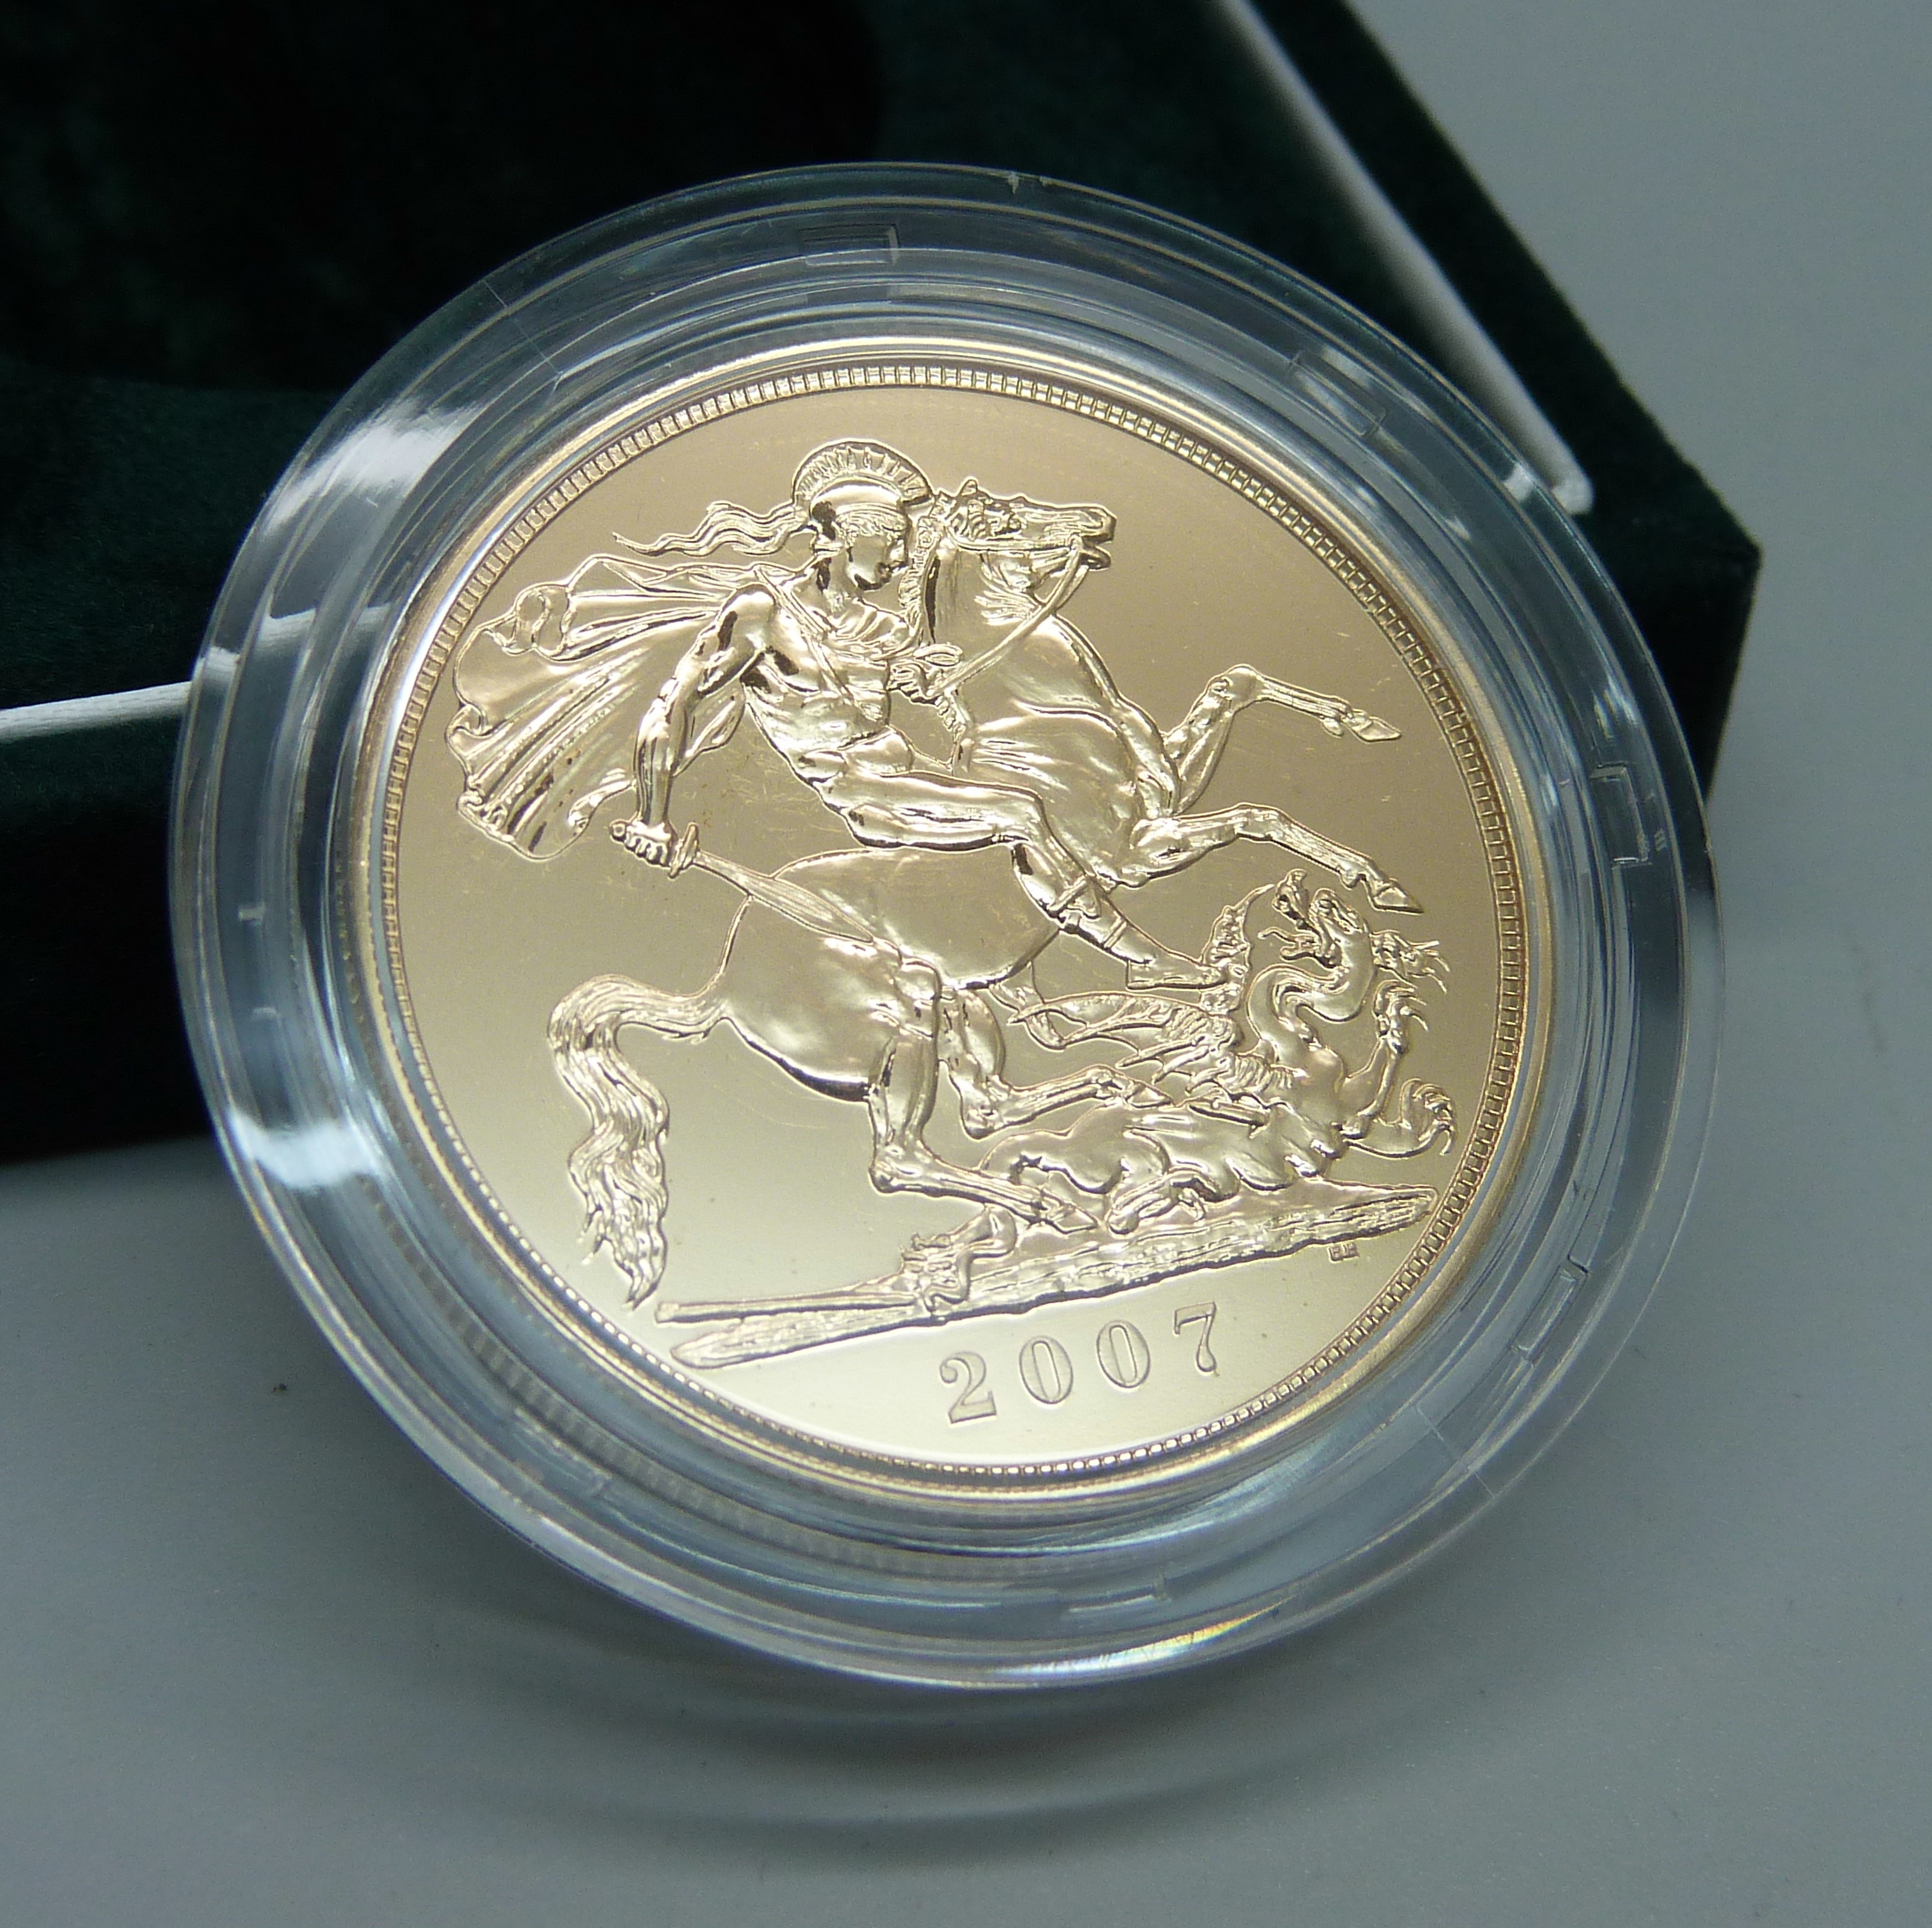 The Royal Mint 2007 UK brilliant uncirculated gold five pound coin, no. 0280 - Image 2 of 4